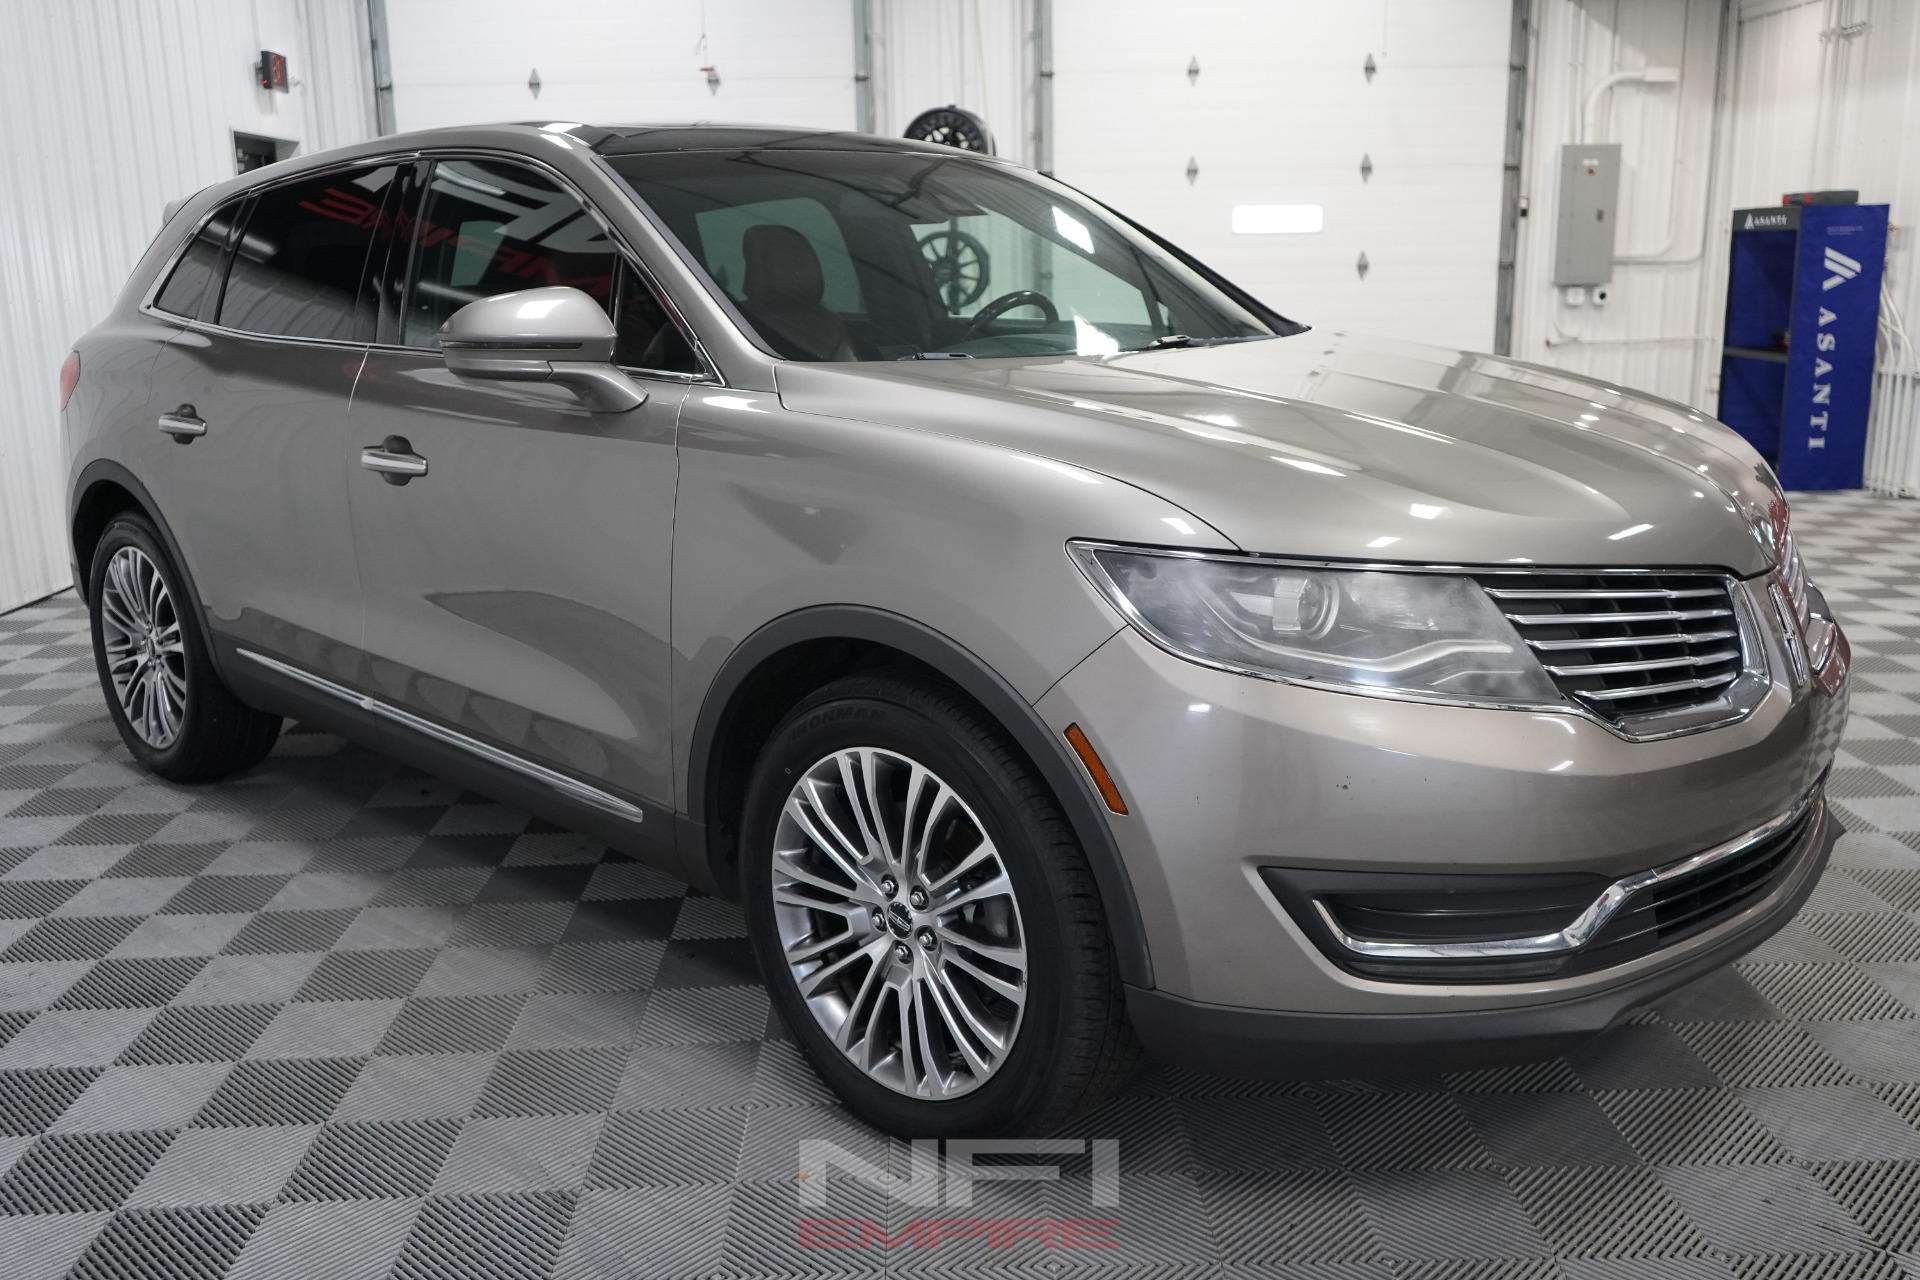 2016 Lincoln MKX 5